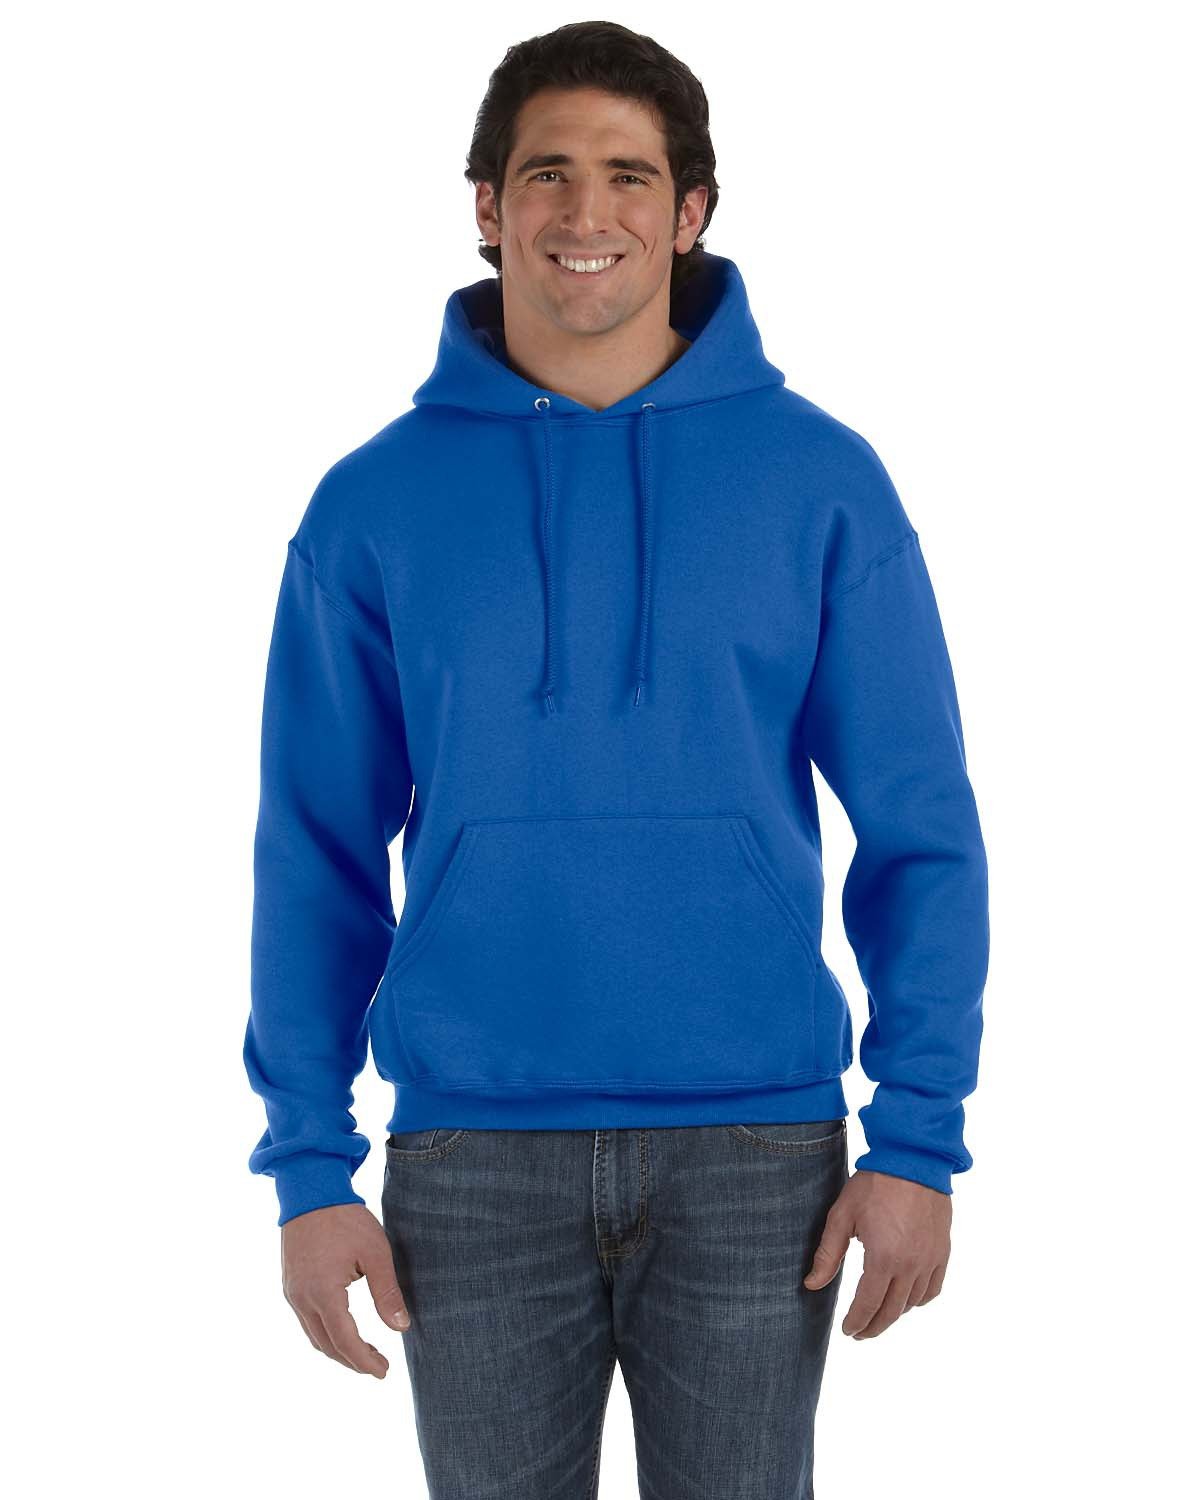 Fruit of the Loom Adult Supercotton™ Pullover Hooded Sweatshirt ROYAL 